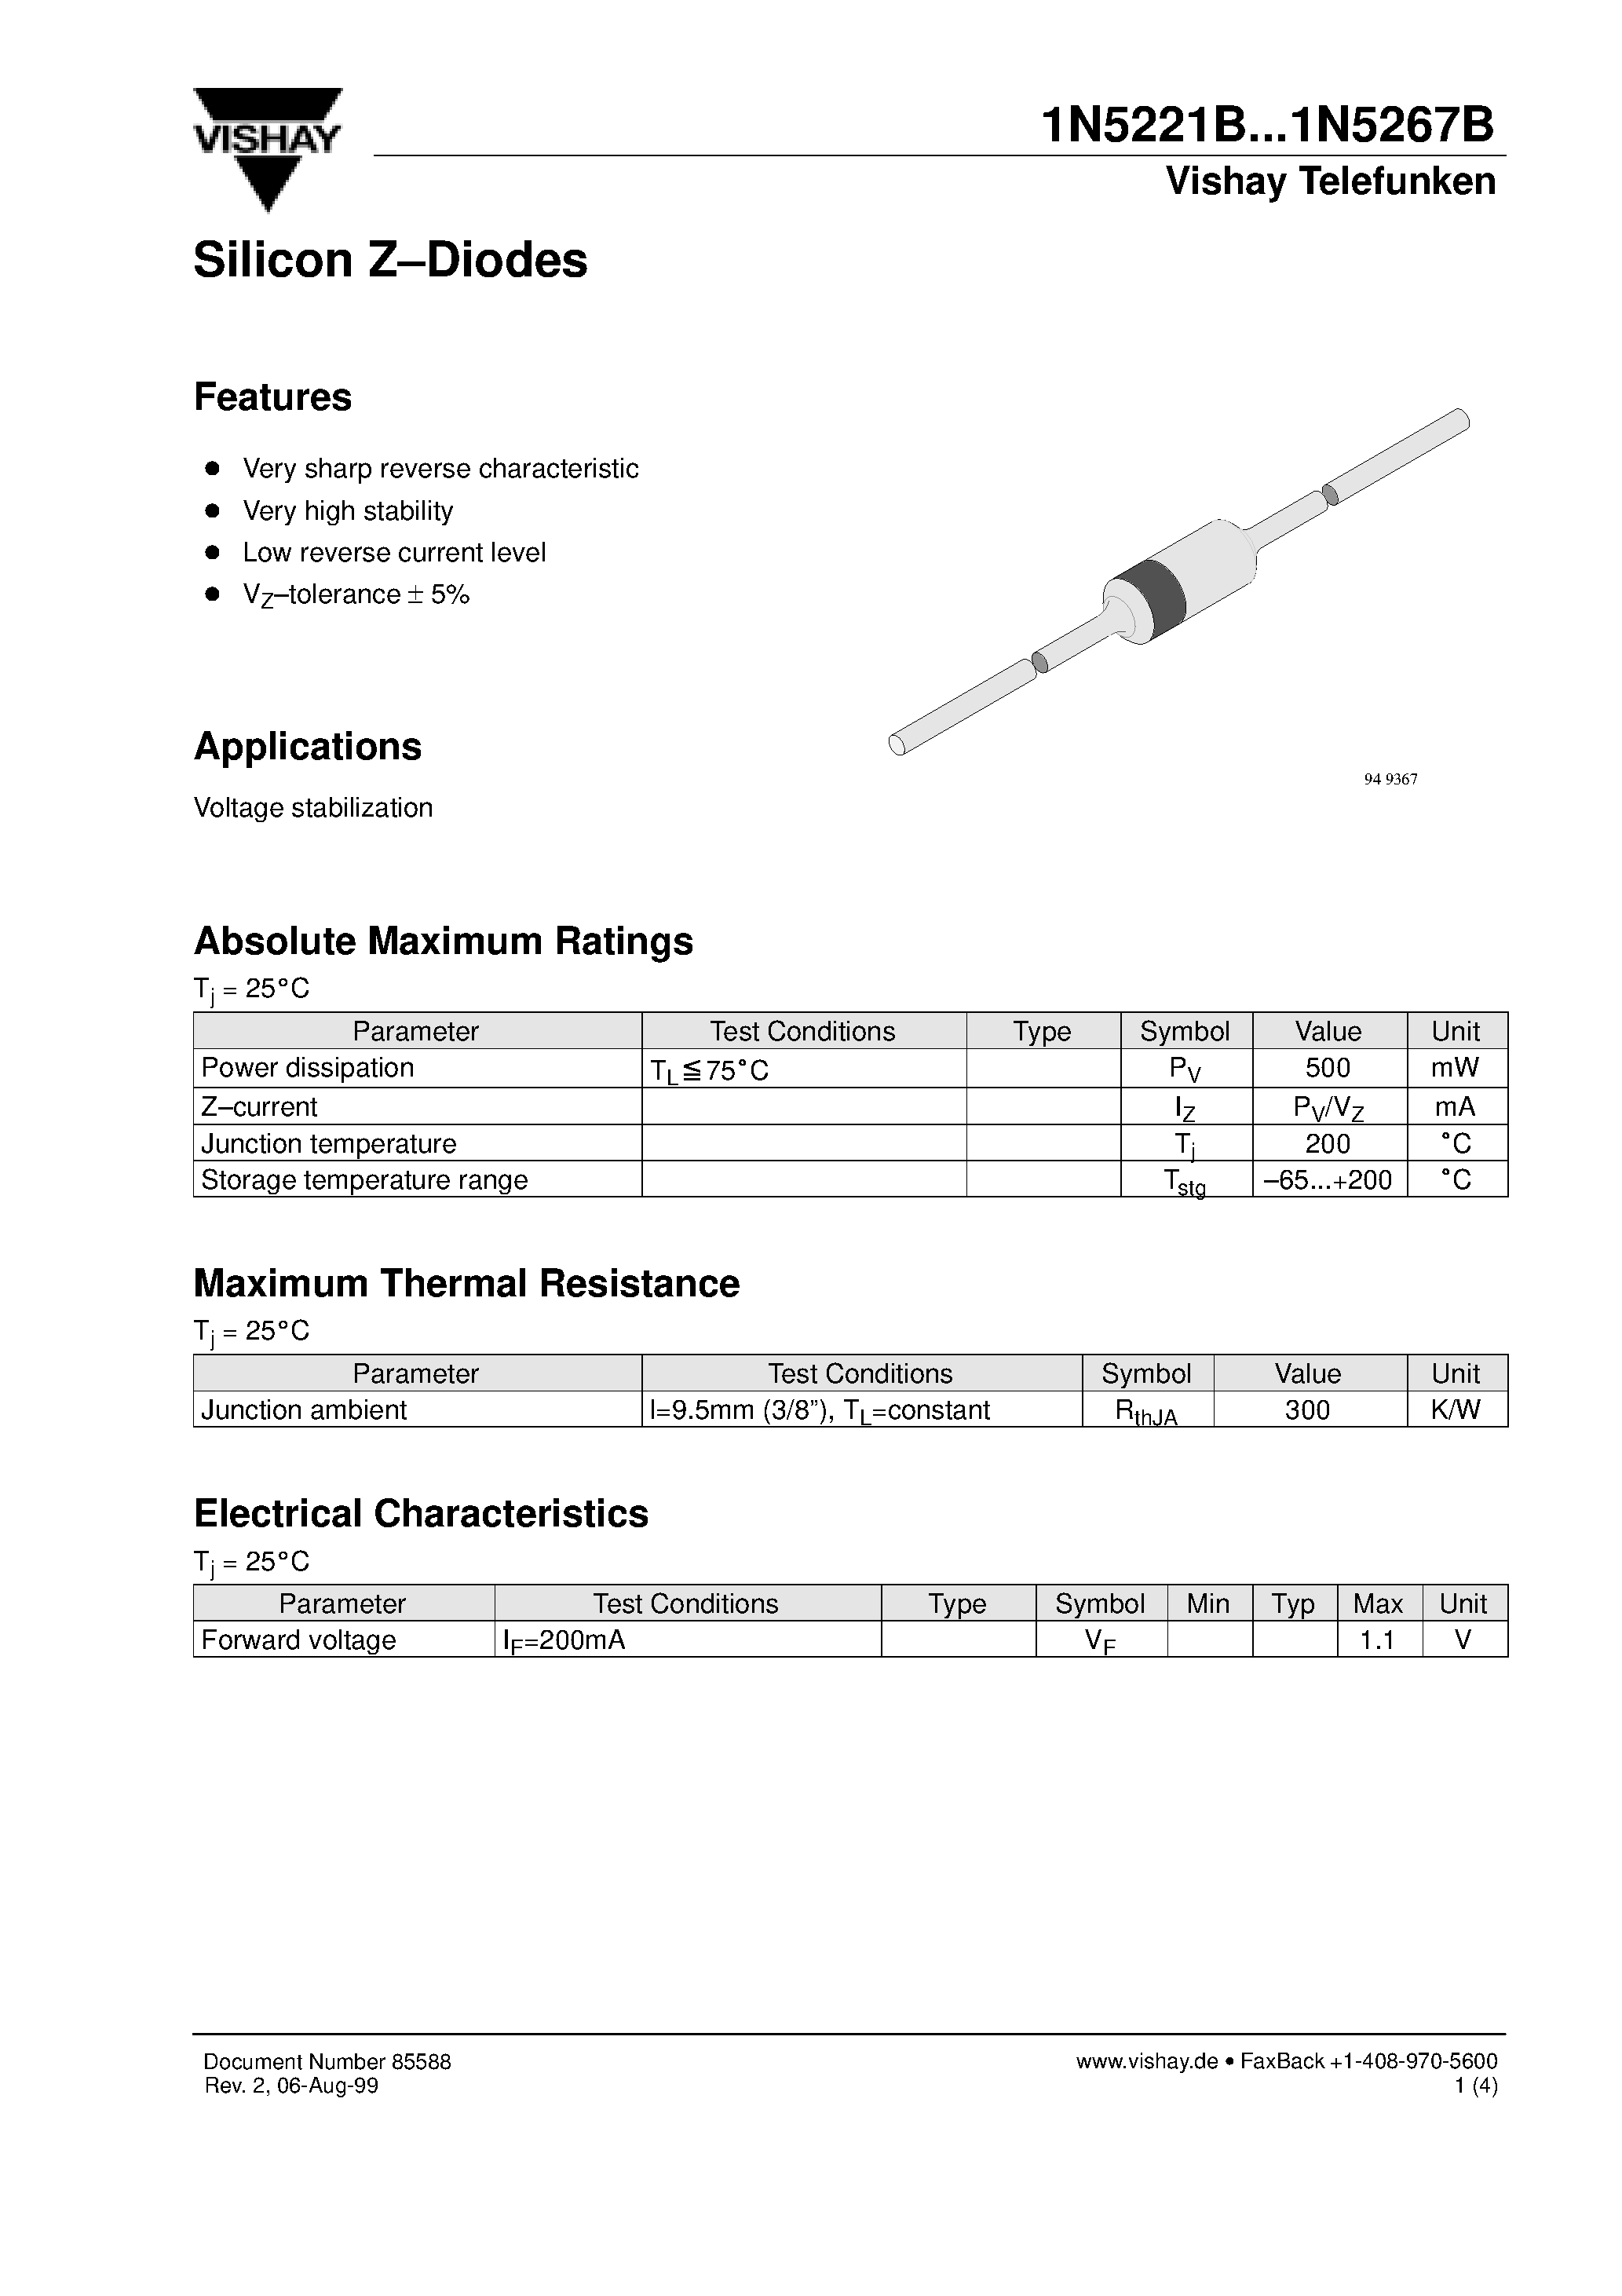 Datasheet 1N5266B - Silicon Z-Diodes page 1